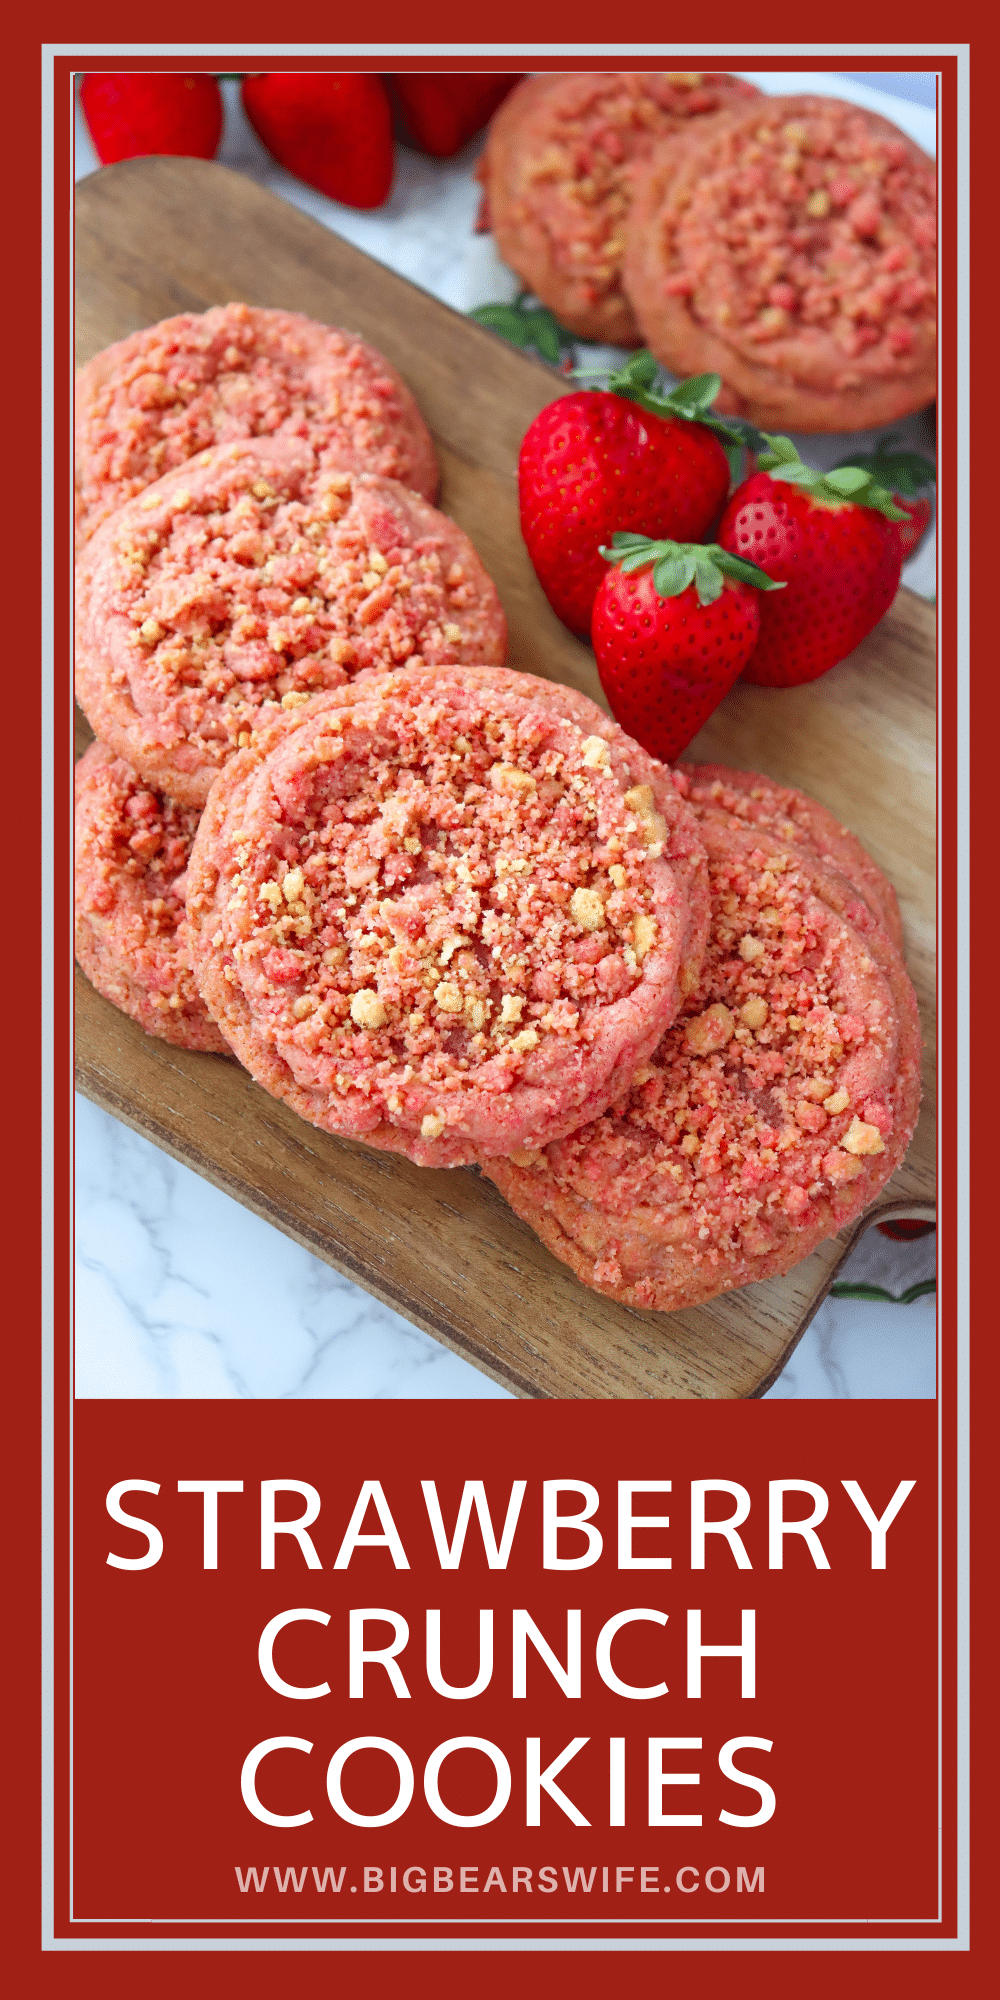 These homemade Strawberry Crunch Cookies are based off of the popular Strawberry Crunch Ice Cream bars and are loaded with strawberry flavor! They even have the iconic Strawberry Crunch topping on top!  via @bigbearswife